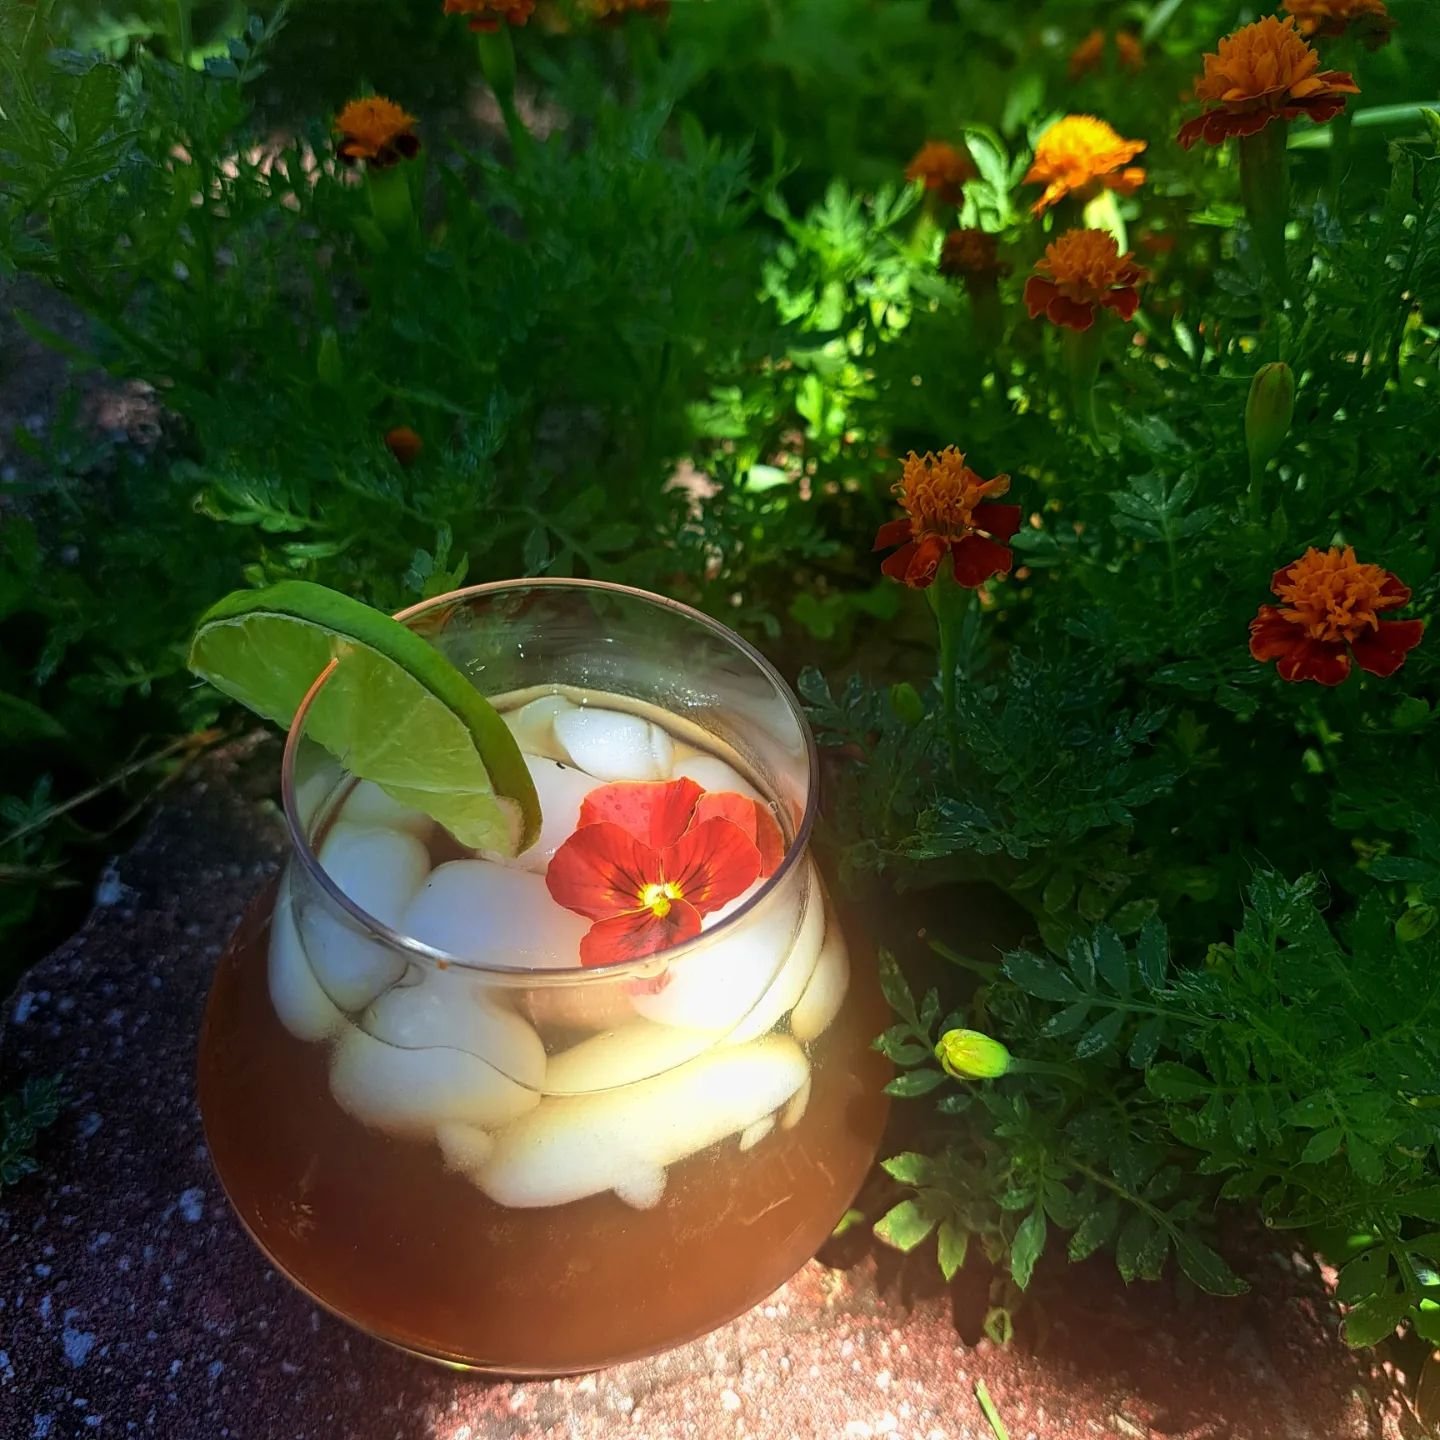 ICED EMOLIENTE

This has been keeping me hydrated during the hotter days working in the garden.  A staple to Peru and found in most food cart stands throughout the seasons this elixir is usually served warm but with Floridas brutal heat, this drink i